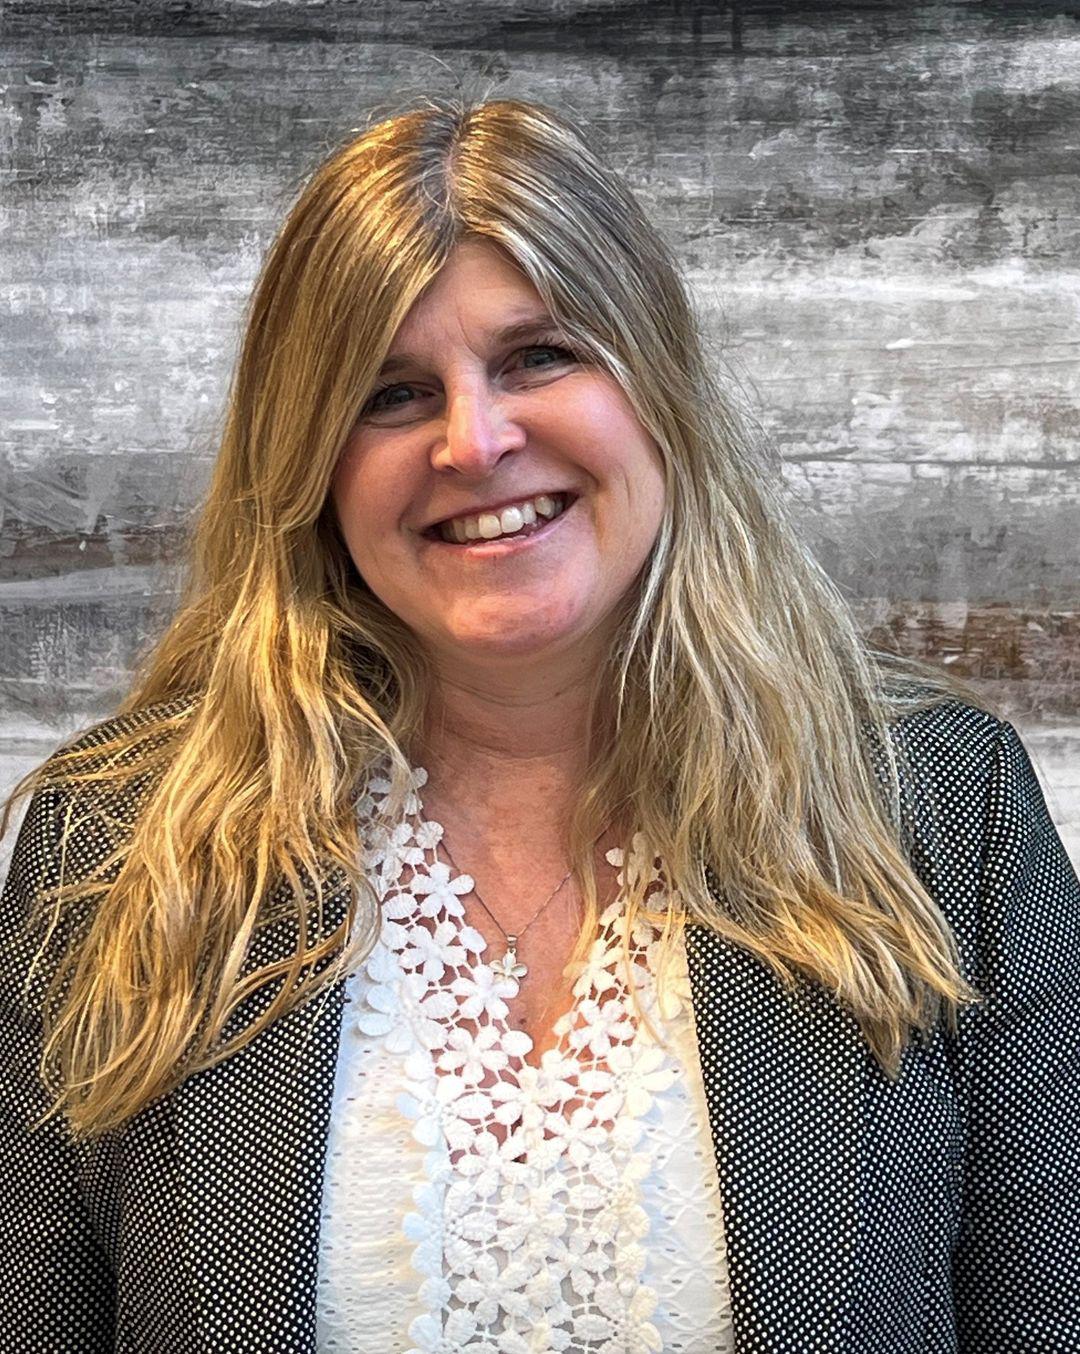 🌟🎉 Join us in welcoming our newest team member, Dawn Miller! With a strong background in customer service and sales, Dawn is ready to help us provide that good neighbor service.  If you are in the area be sure to stop by to say hello! We are so excited to have her join the team.  Let's give her a big round of applause! 👏👩‍💼  #NewTeamMember #WelcomeDawn #GoodNeighbor #lakeoswegoinsurance